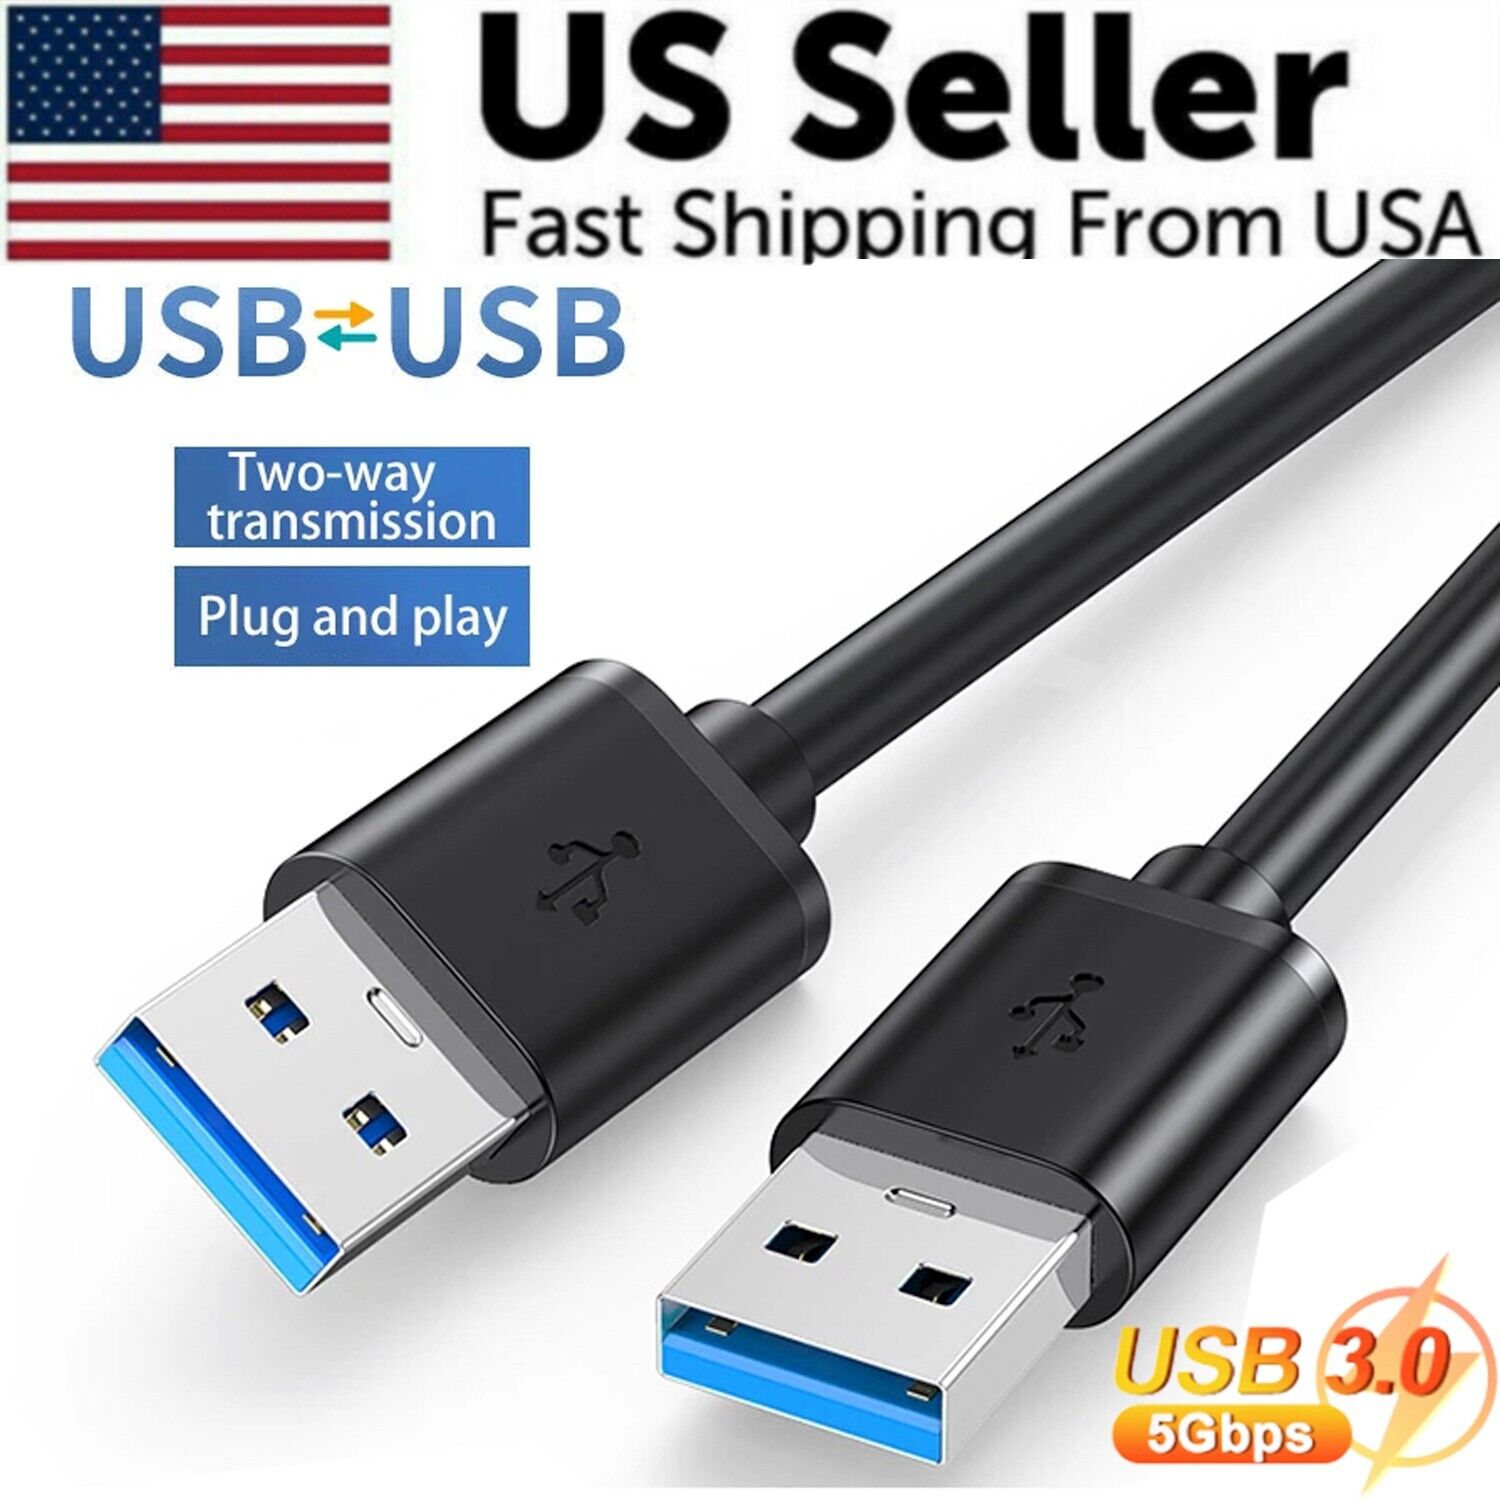 USB 3.0 A Male to A Male Cable Data Transfer Super Speed Power Charger Metal 6FT